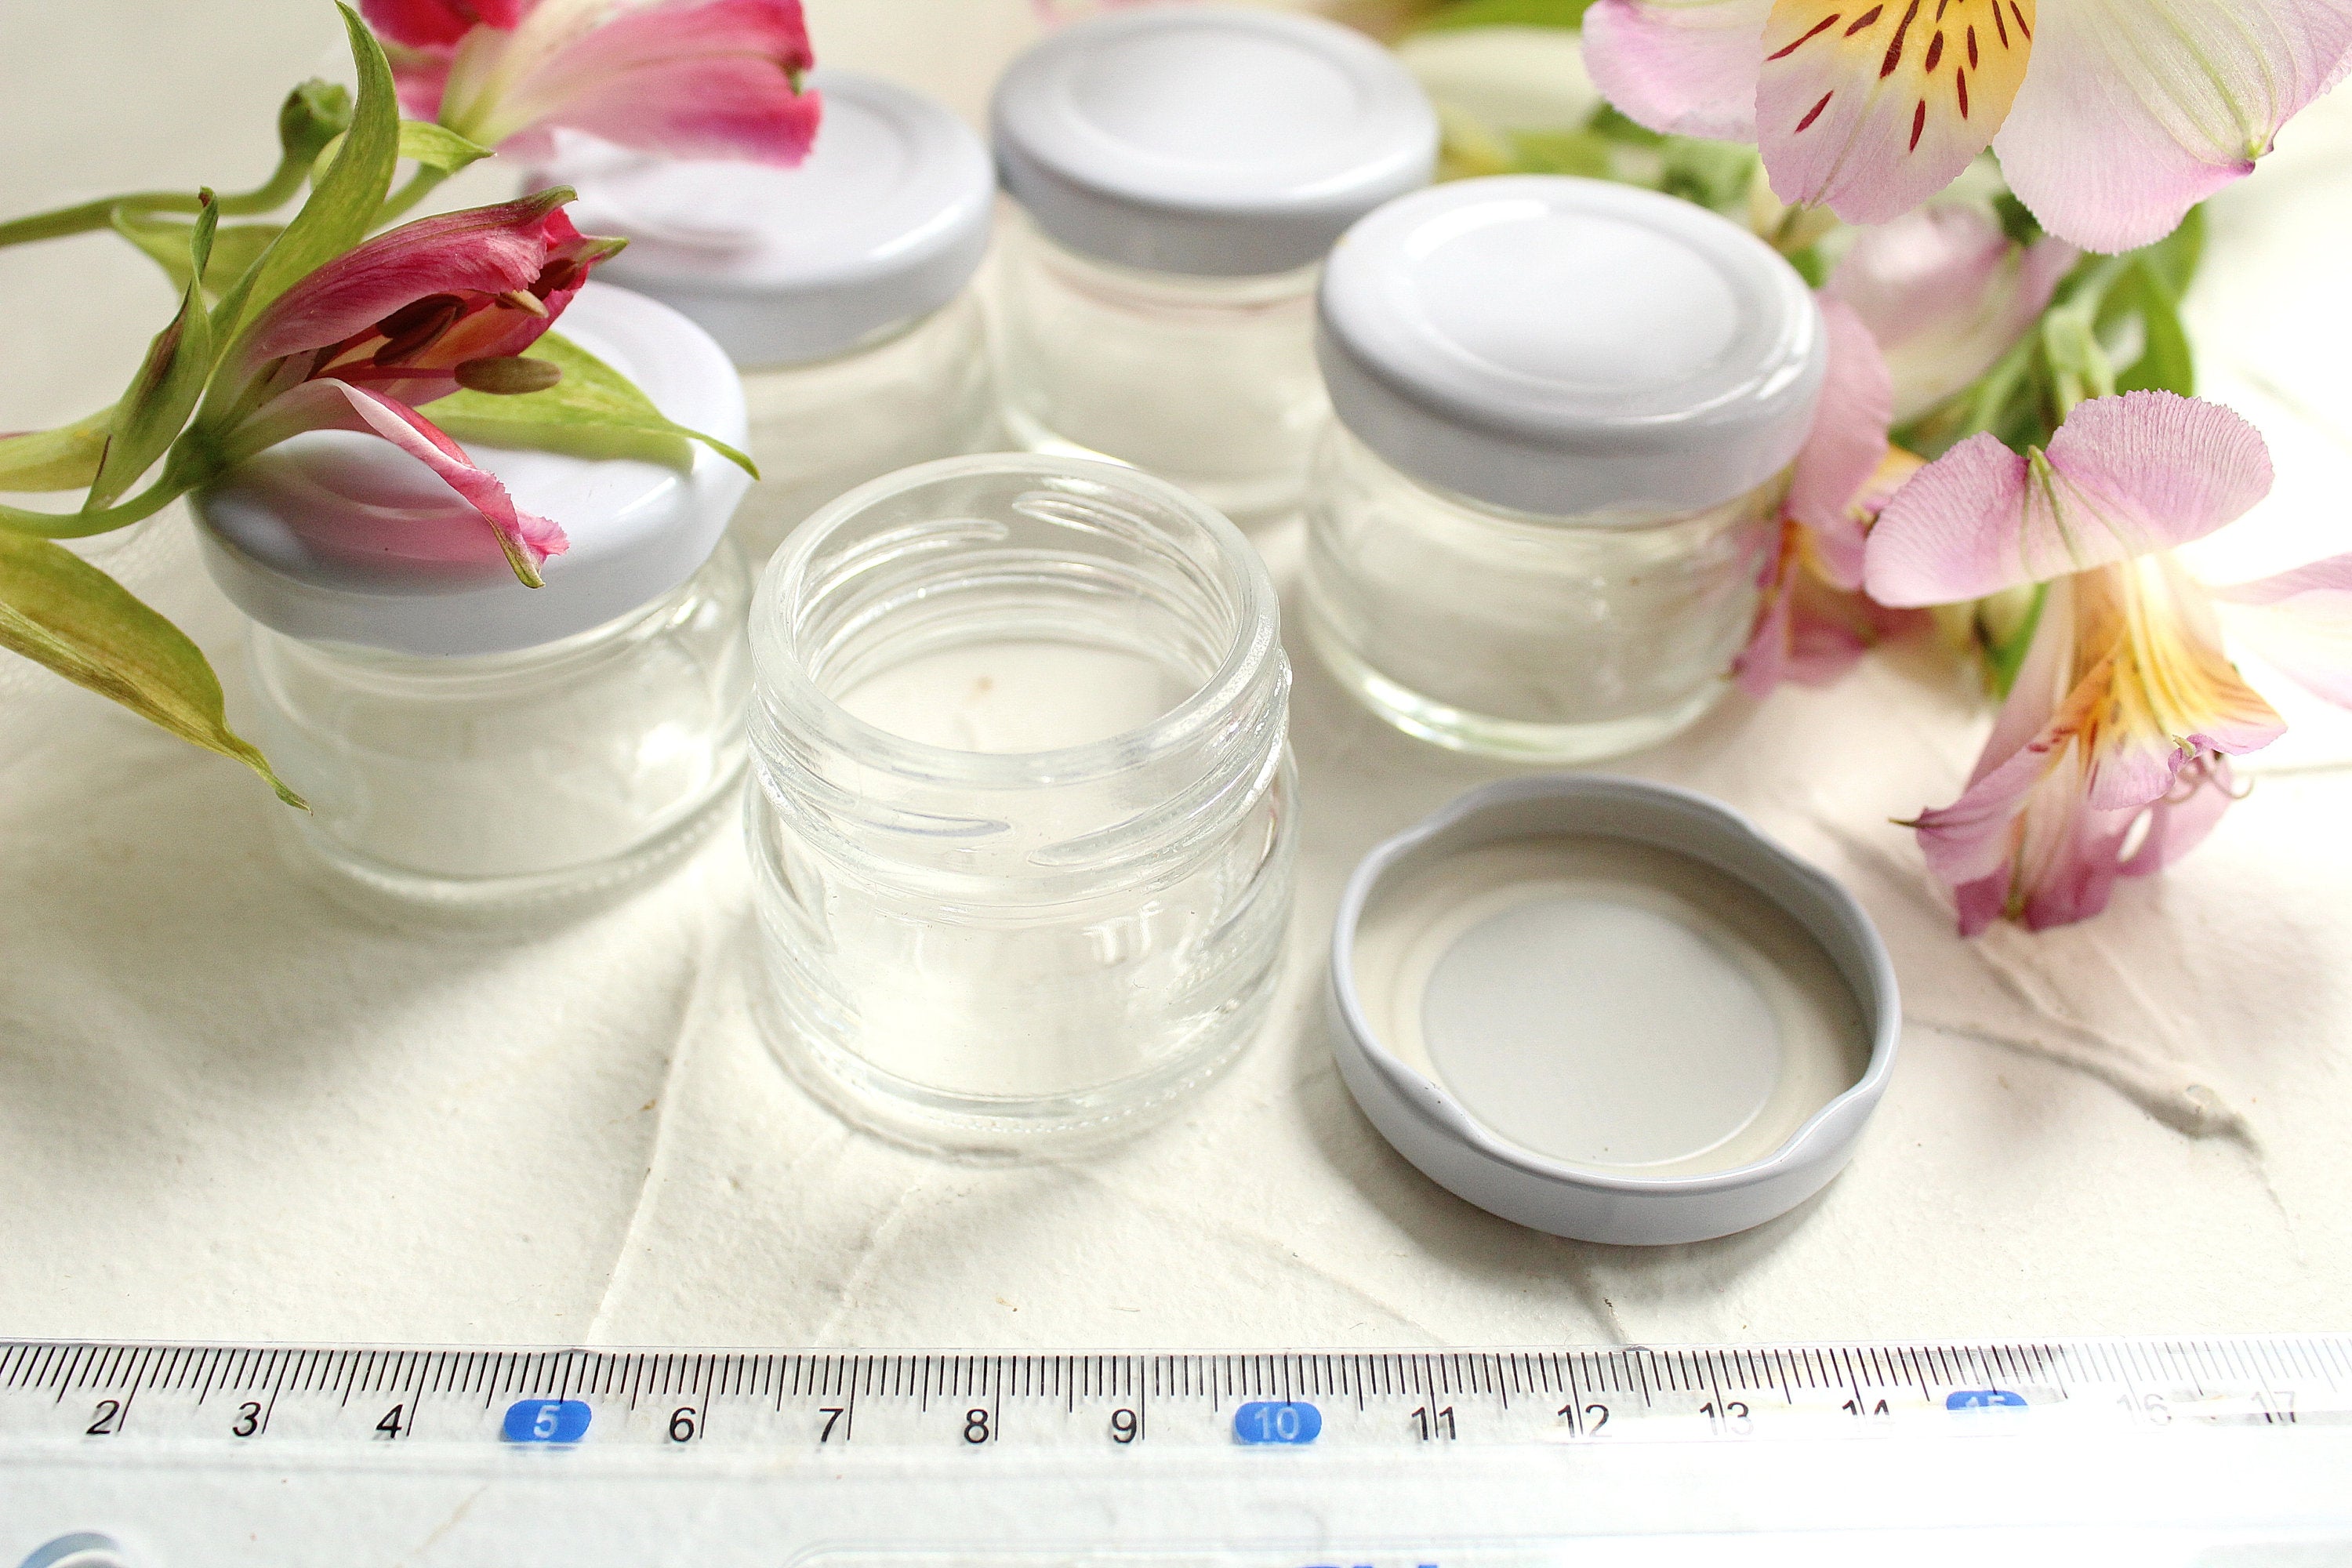 Free 1 oz (30ml) Glass Jar, Customizable Lid, Free of BPA, Plastisol lined, Glass Jar with Lid, Kitchen Glass Jars, Glass Jars for Spices